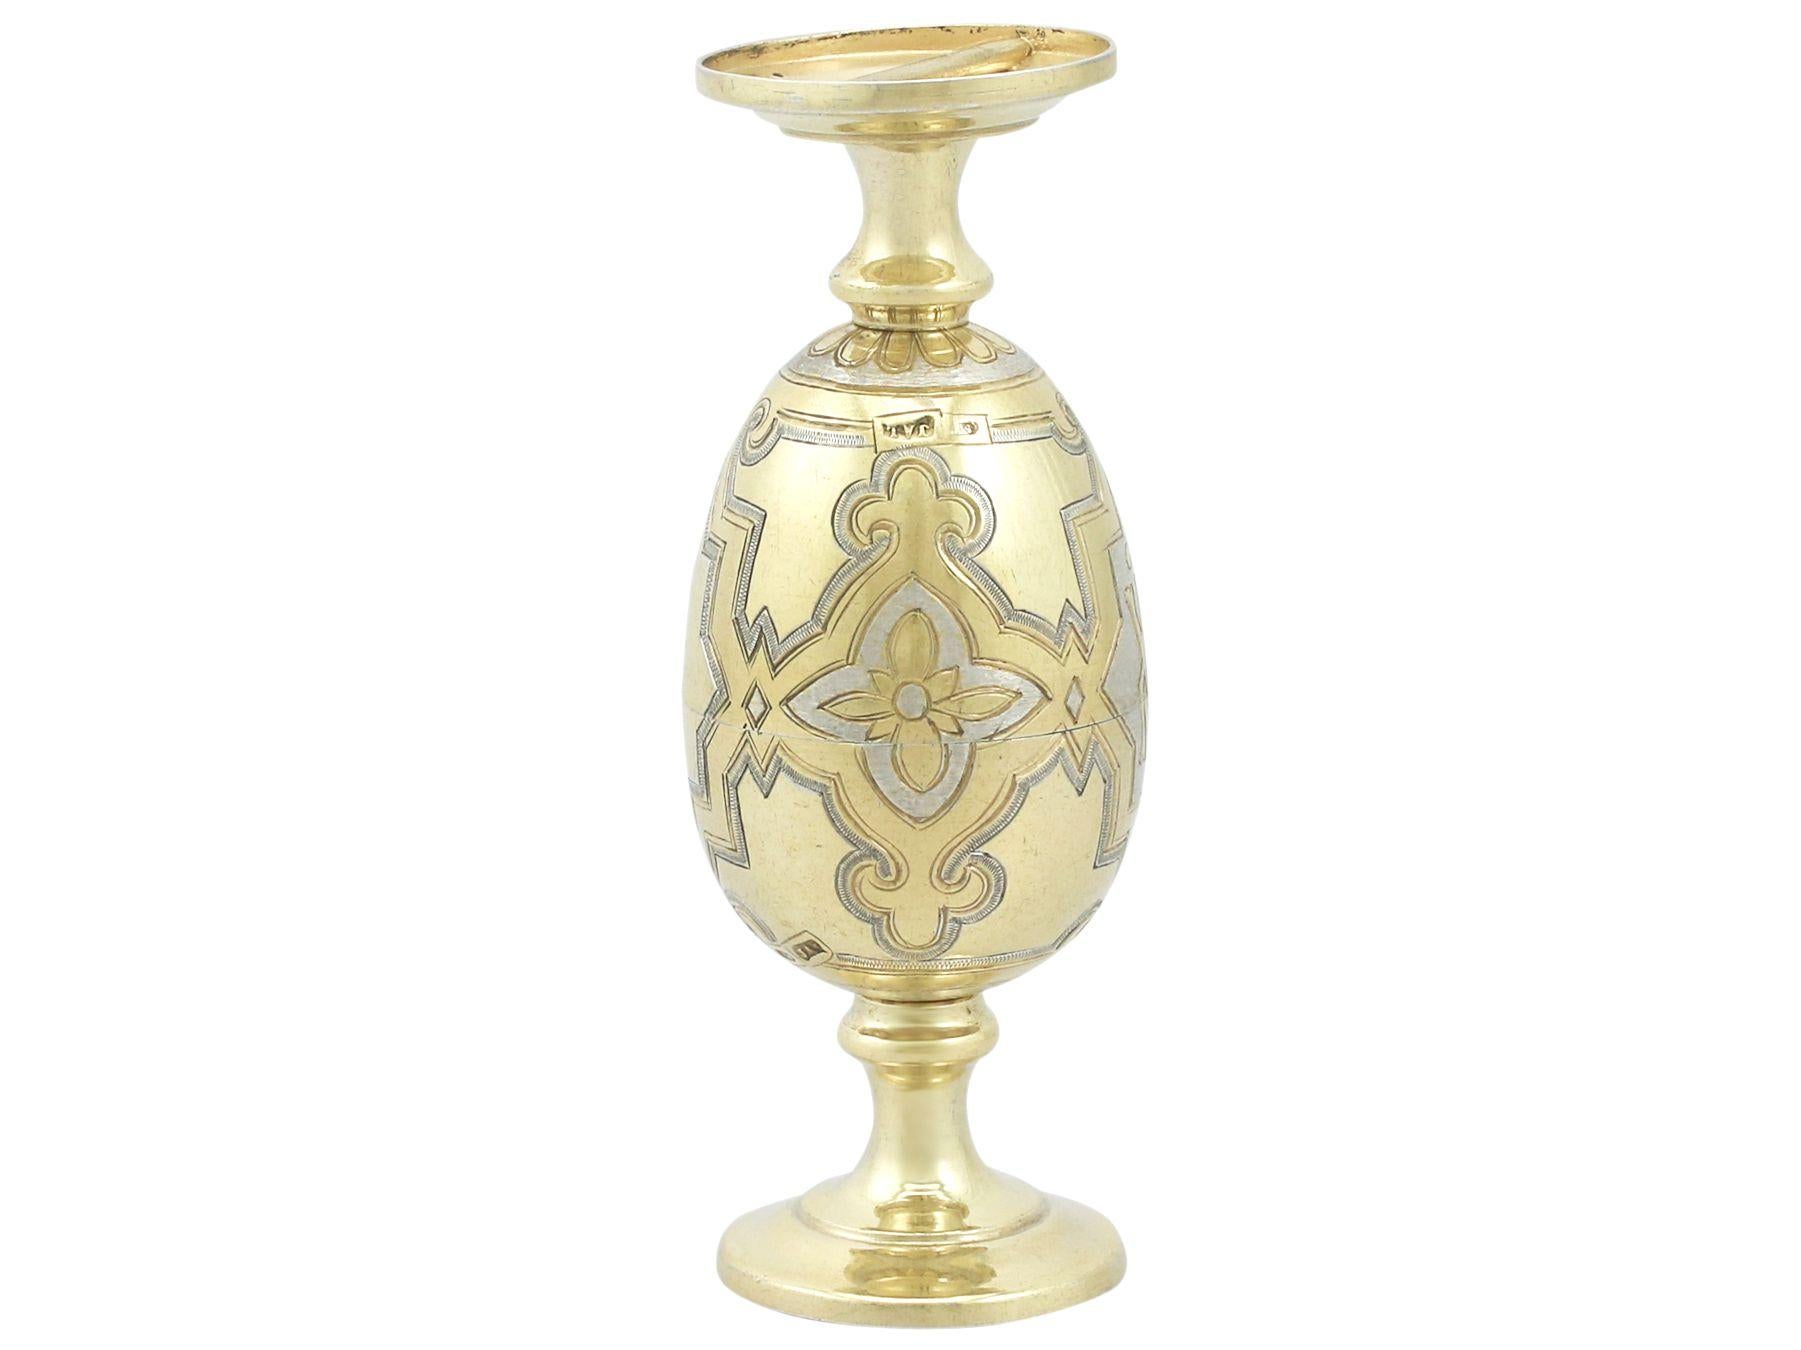 An exceptional, fine and impressive pair of antique Russian silver gilt egg cups; an addition to our silver cruet and condiment collection.

These exceptional antique Russian silver egg cups have a circular rounded form to a swept pedestal